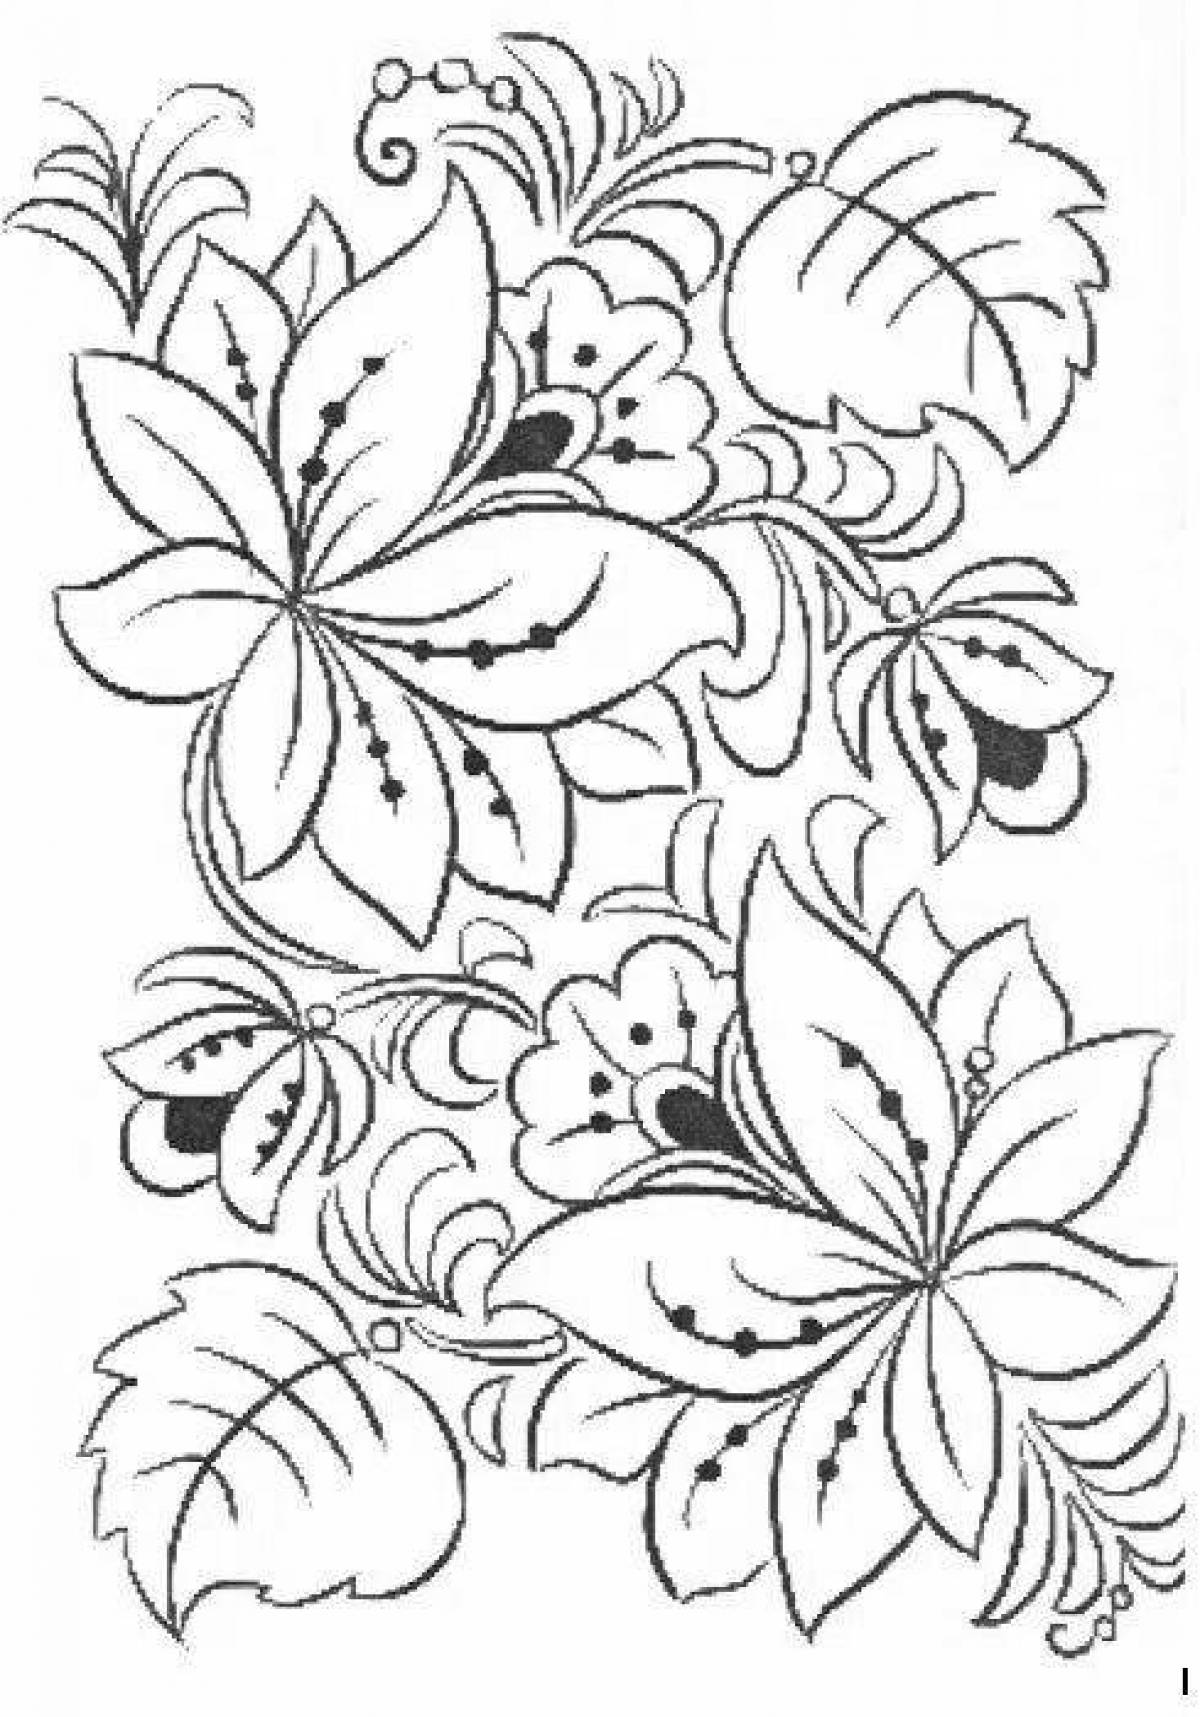 Intriguing coloring book in folk style